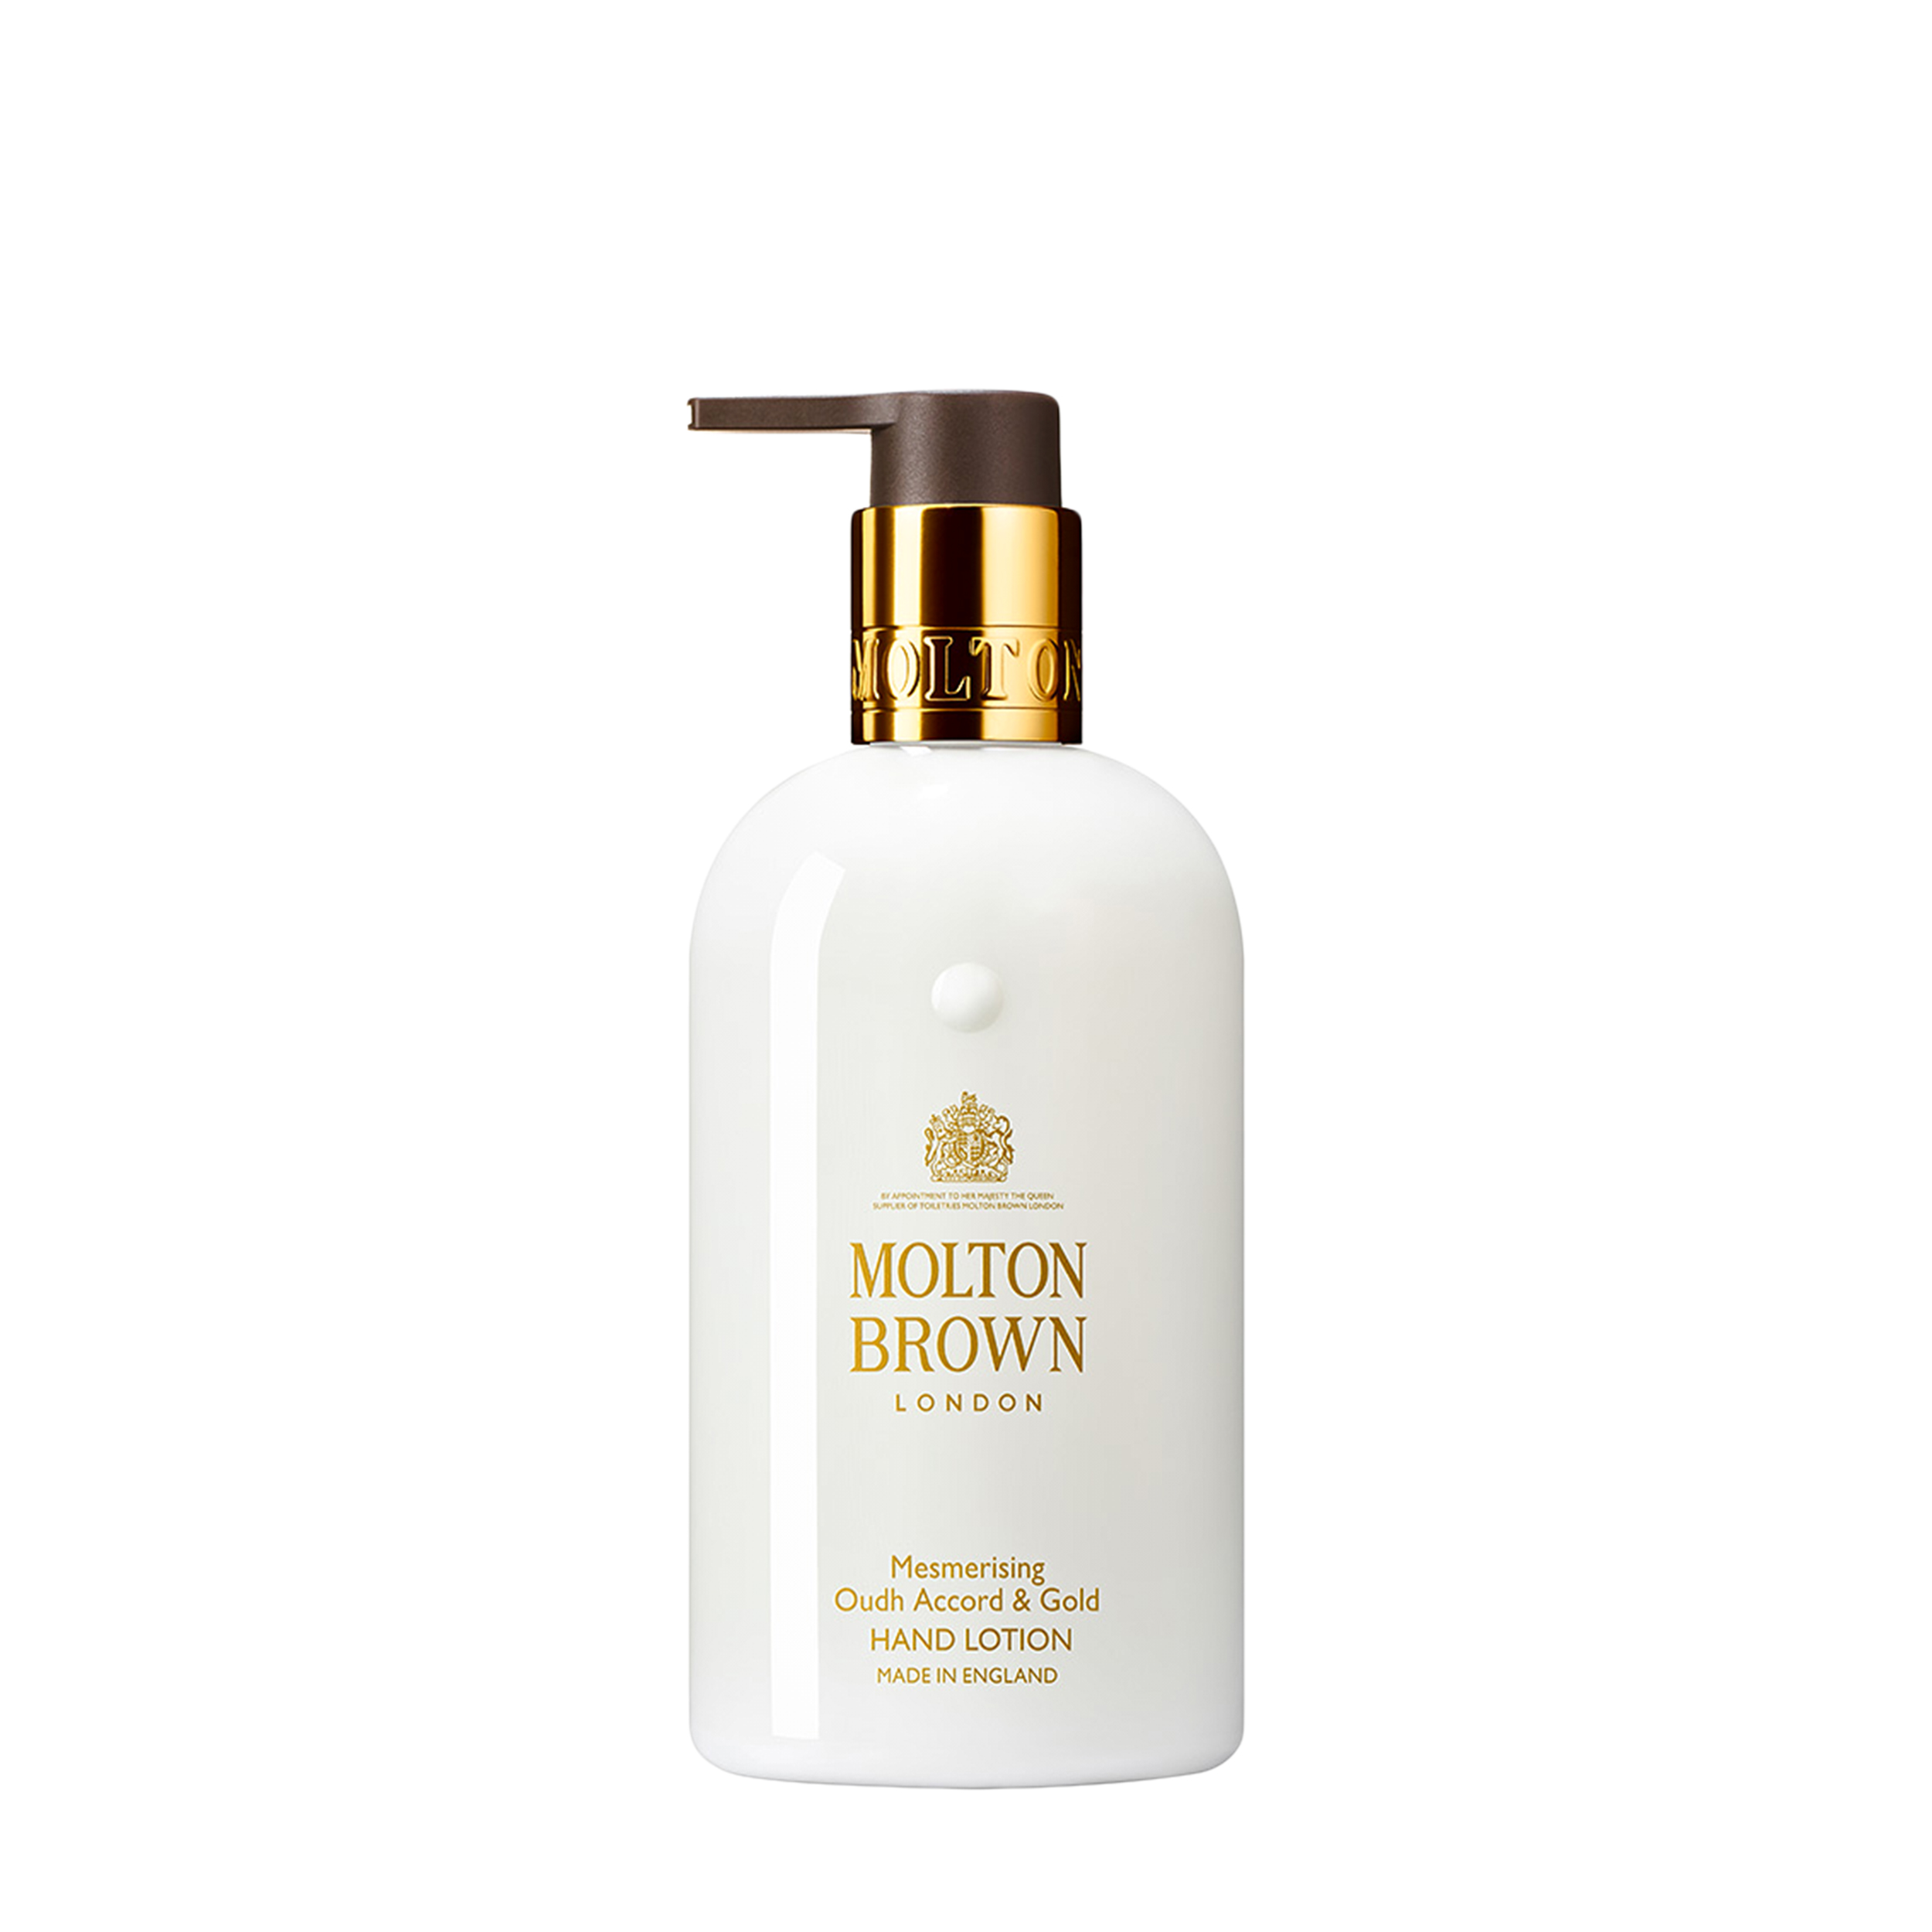 Molton Brown Molton Brown Лосьон для рук Mesmerising Oudh Accord & Gold Hand Lotion 300 мл NHH232 Лосьон для рук Mesmerising Oudh Accord & Gold Hand Lotion 300 мл - фото 1